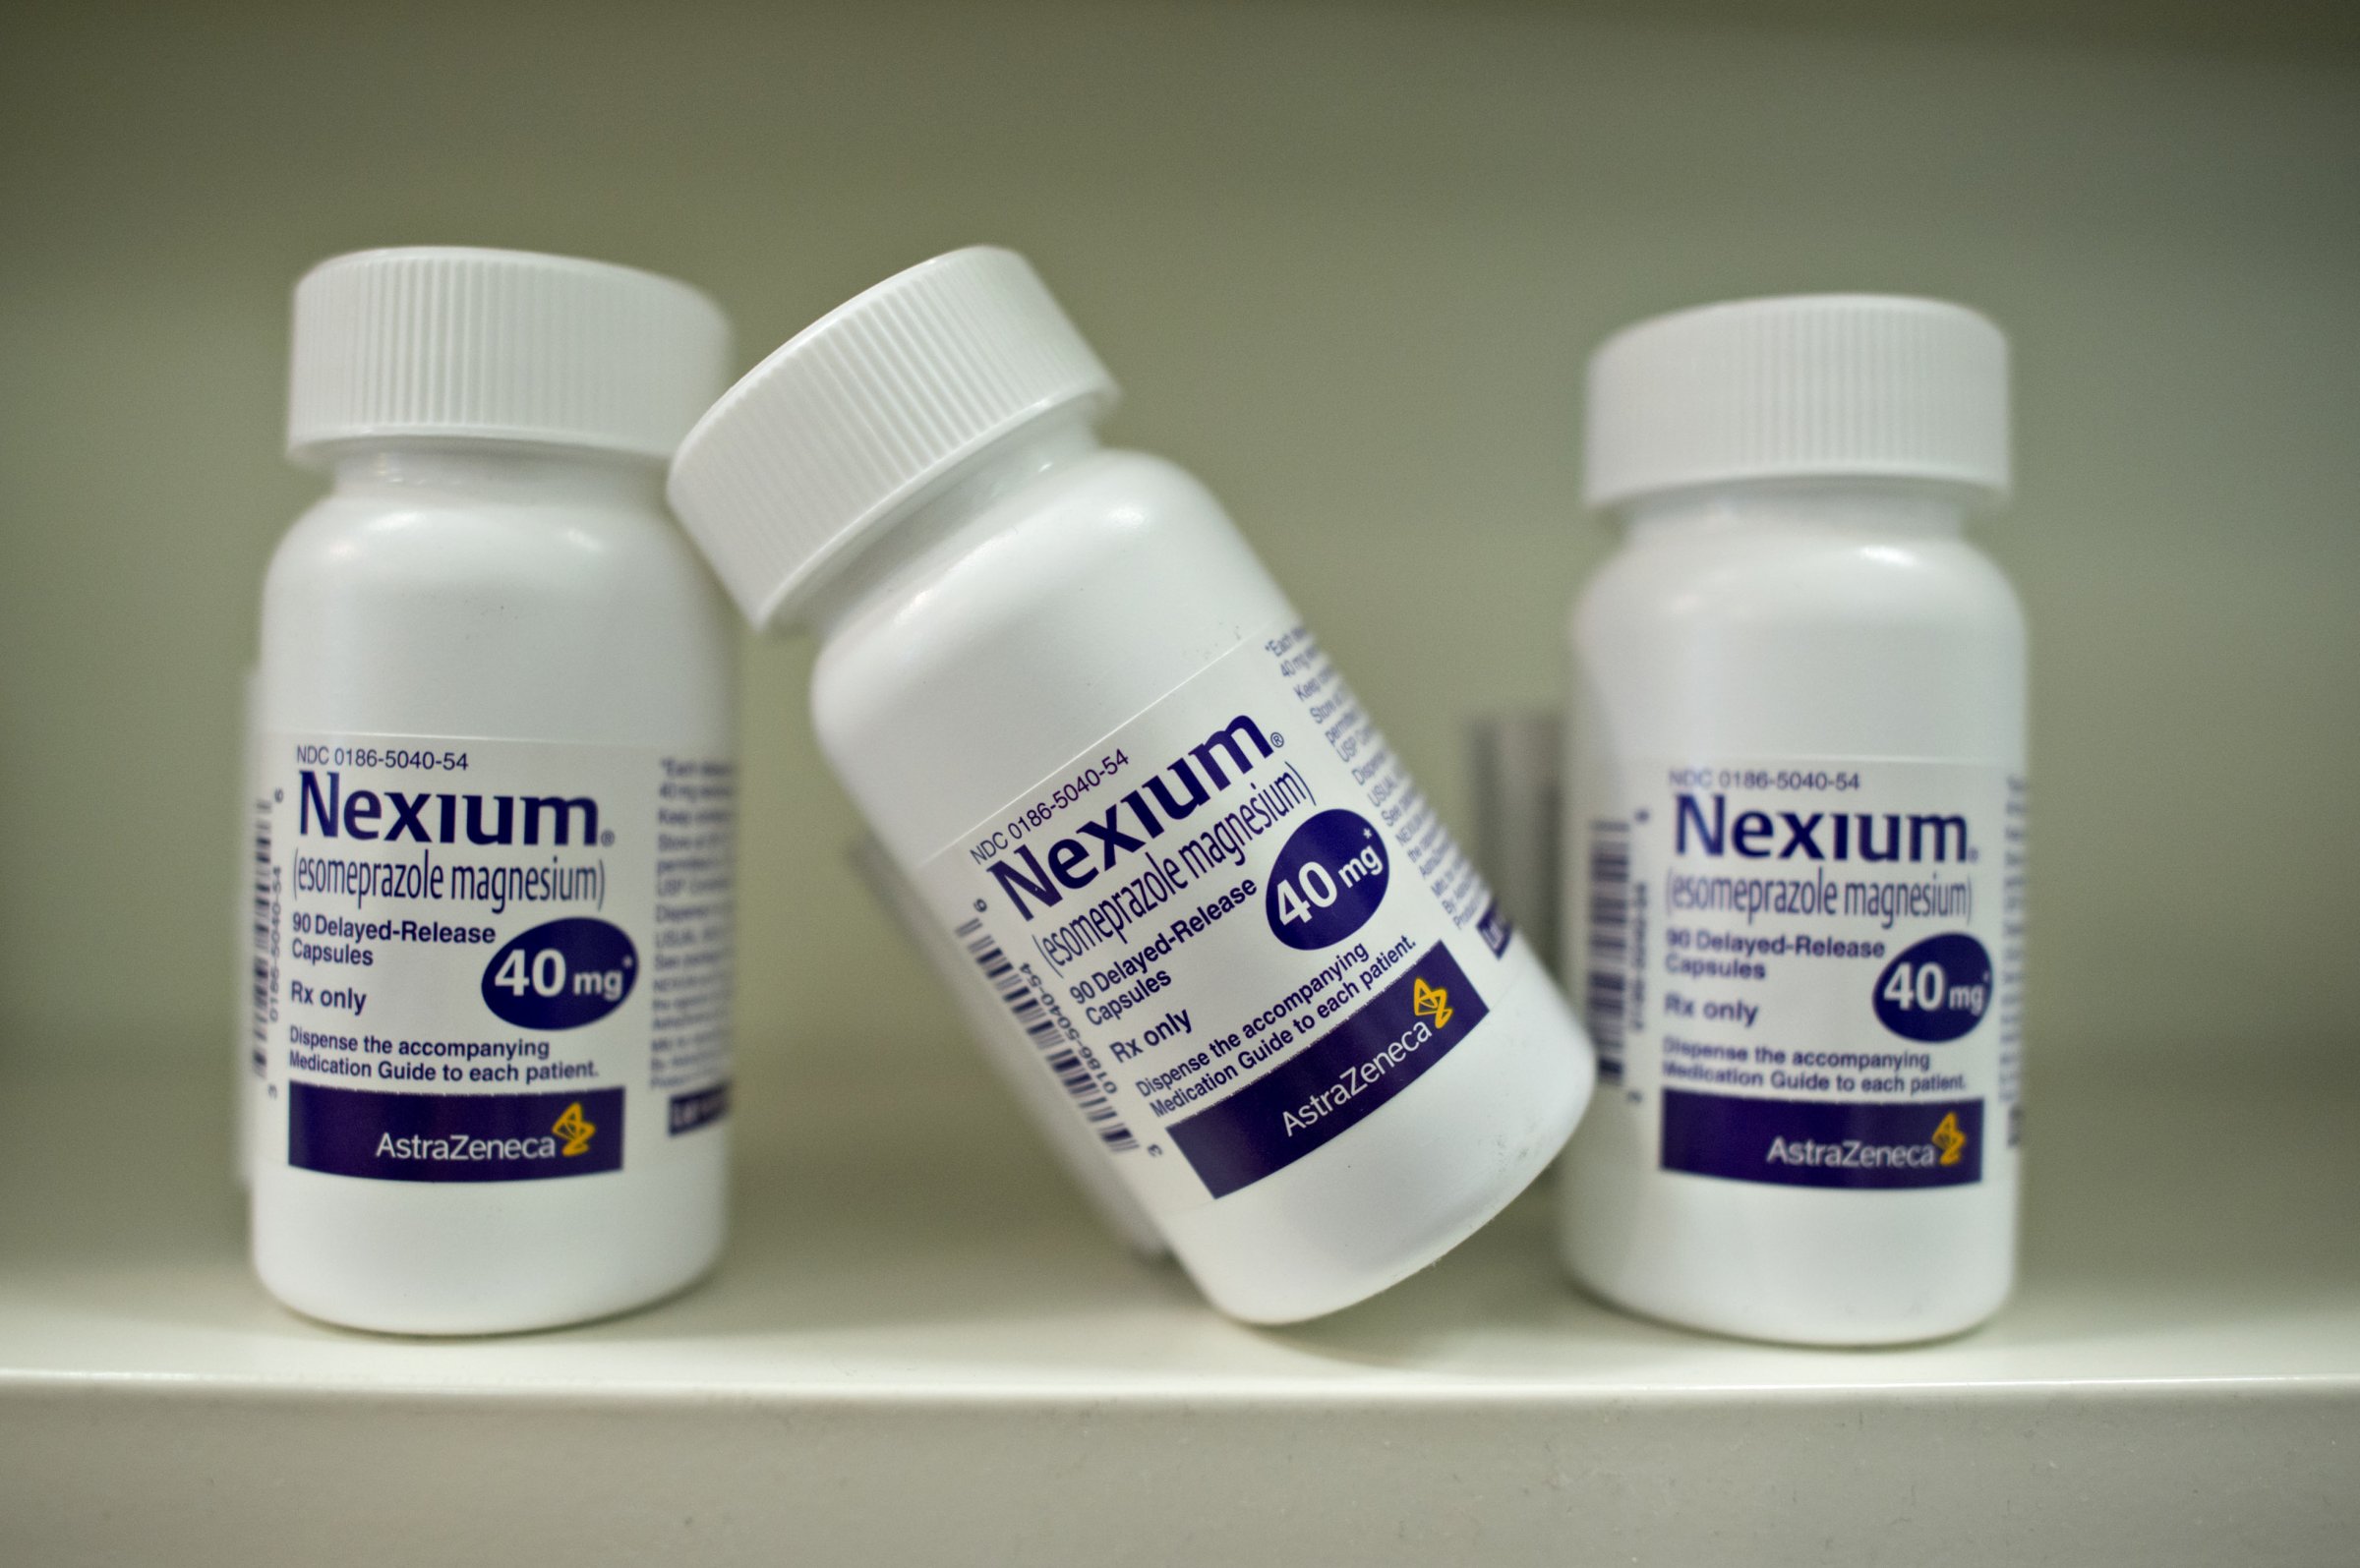 Bottles of AstraZeneca Plc's Nexium heartburn medication are arranged for a photograph at a pharmacy in Princeton, Illinois, U.S., on Wednesday, Aug. 20, 2014.